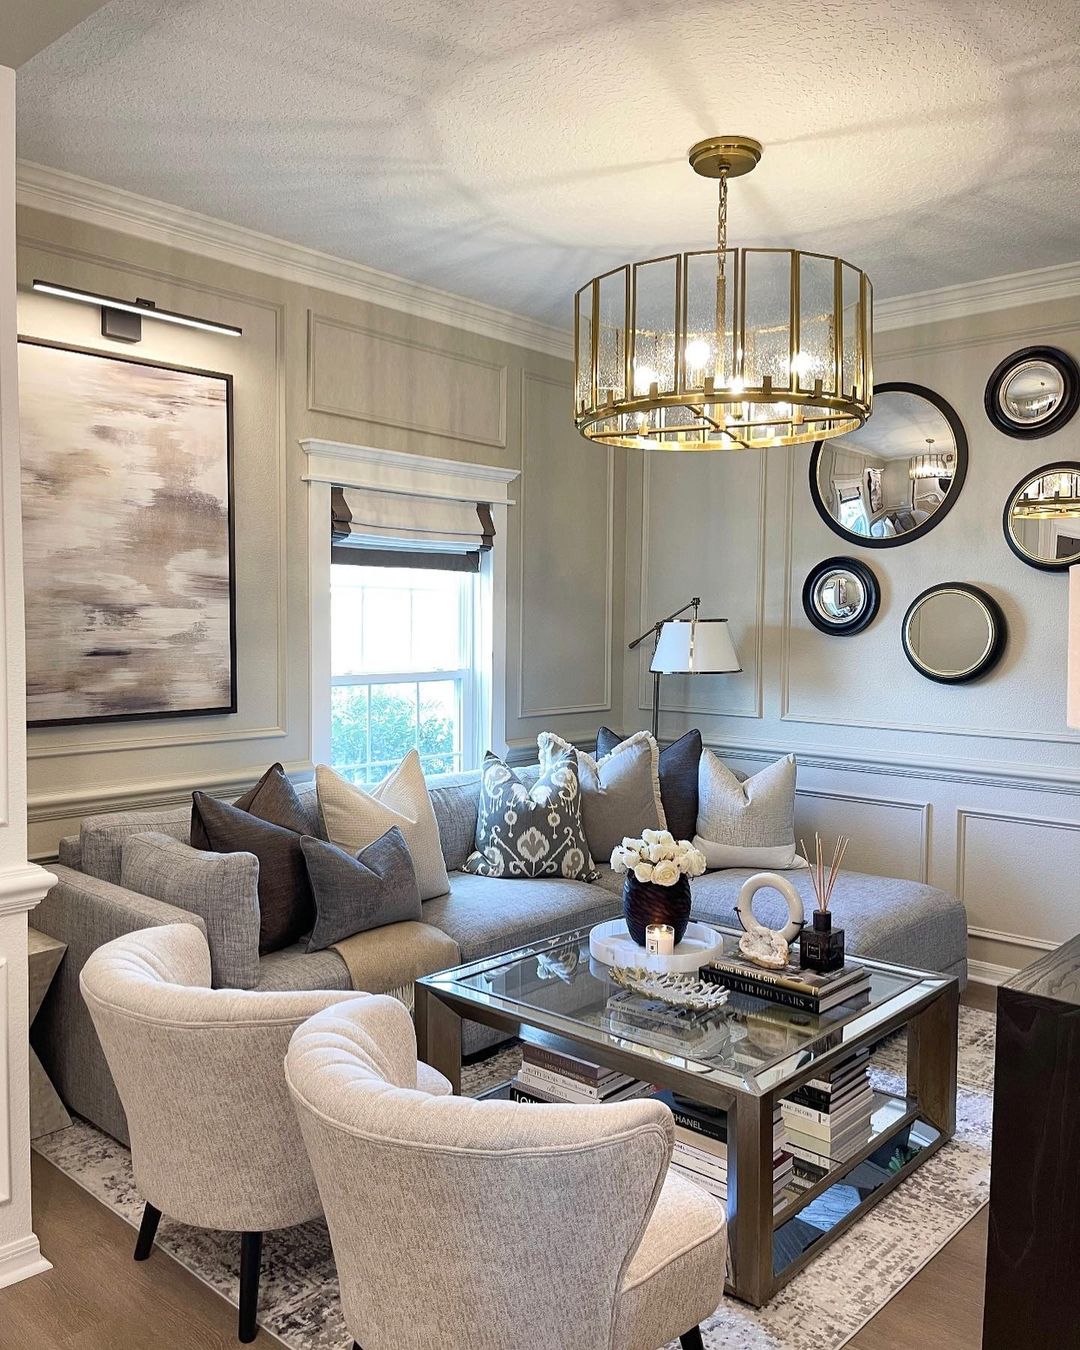 Combine Statement Chandeliers with Accent Lighting